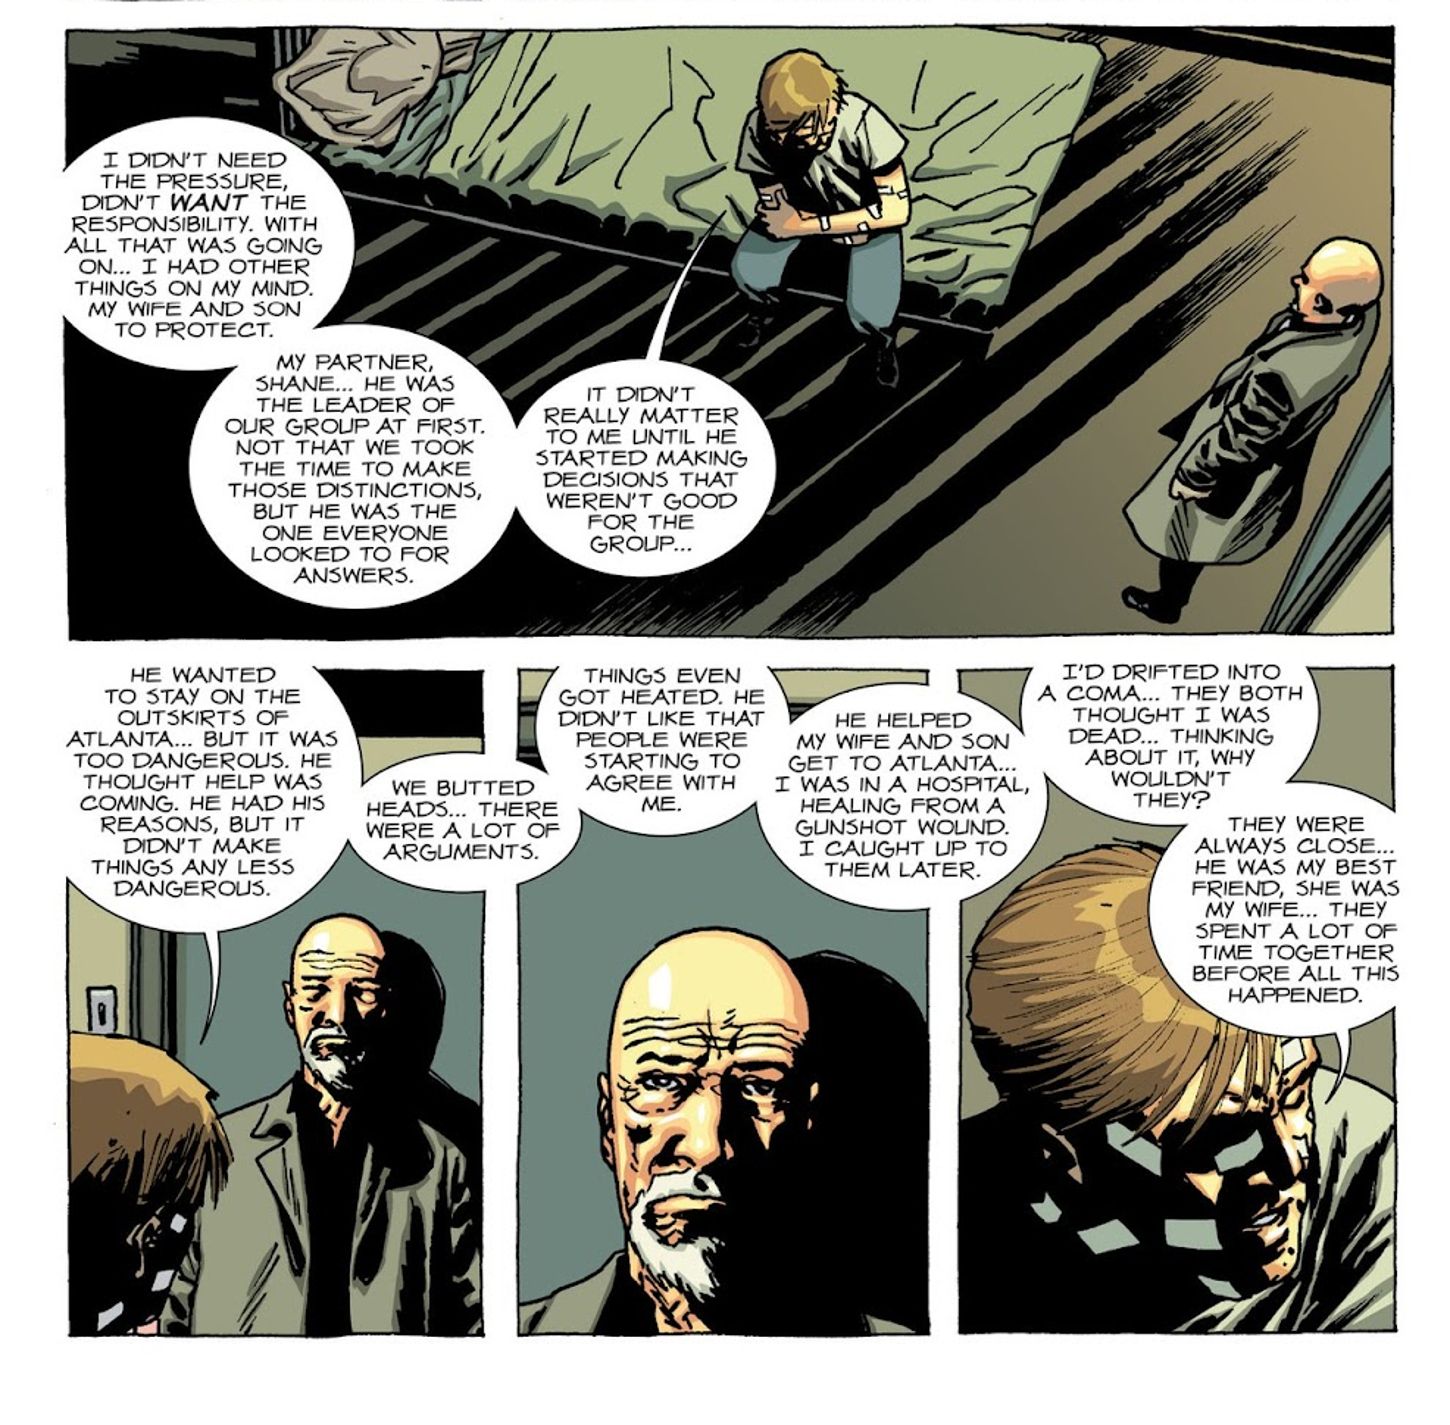 From Walking Dead #76, Rick analyzes what happened between Shane and Lori